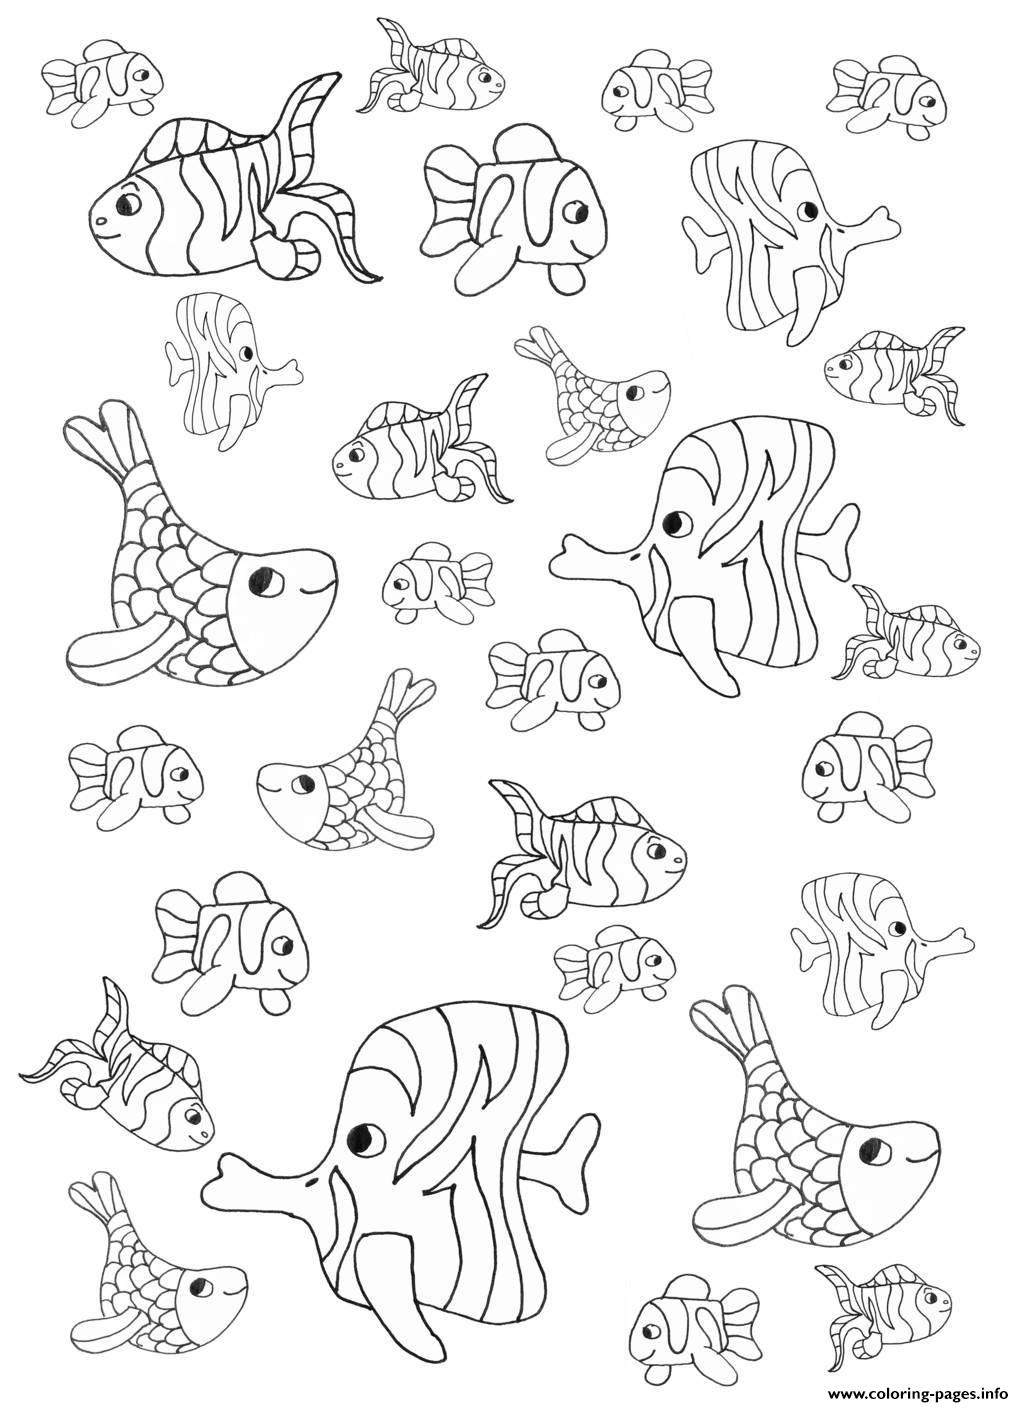 Adult Little Fishes coloring